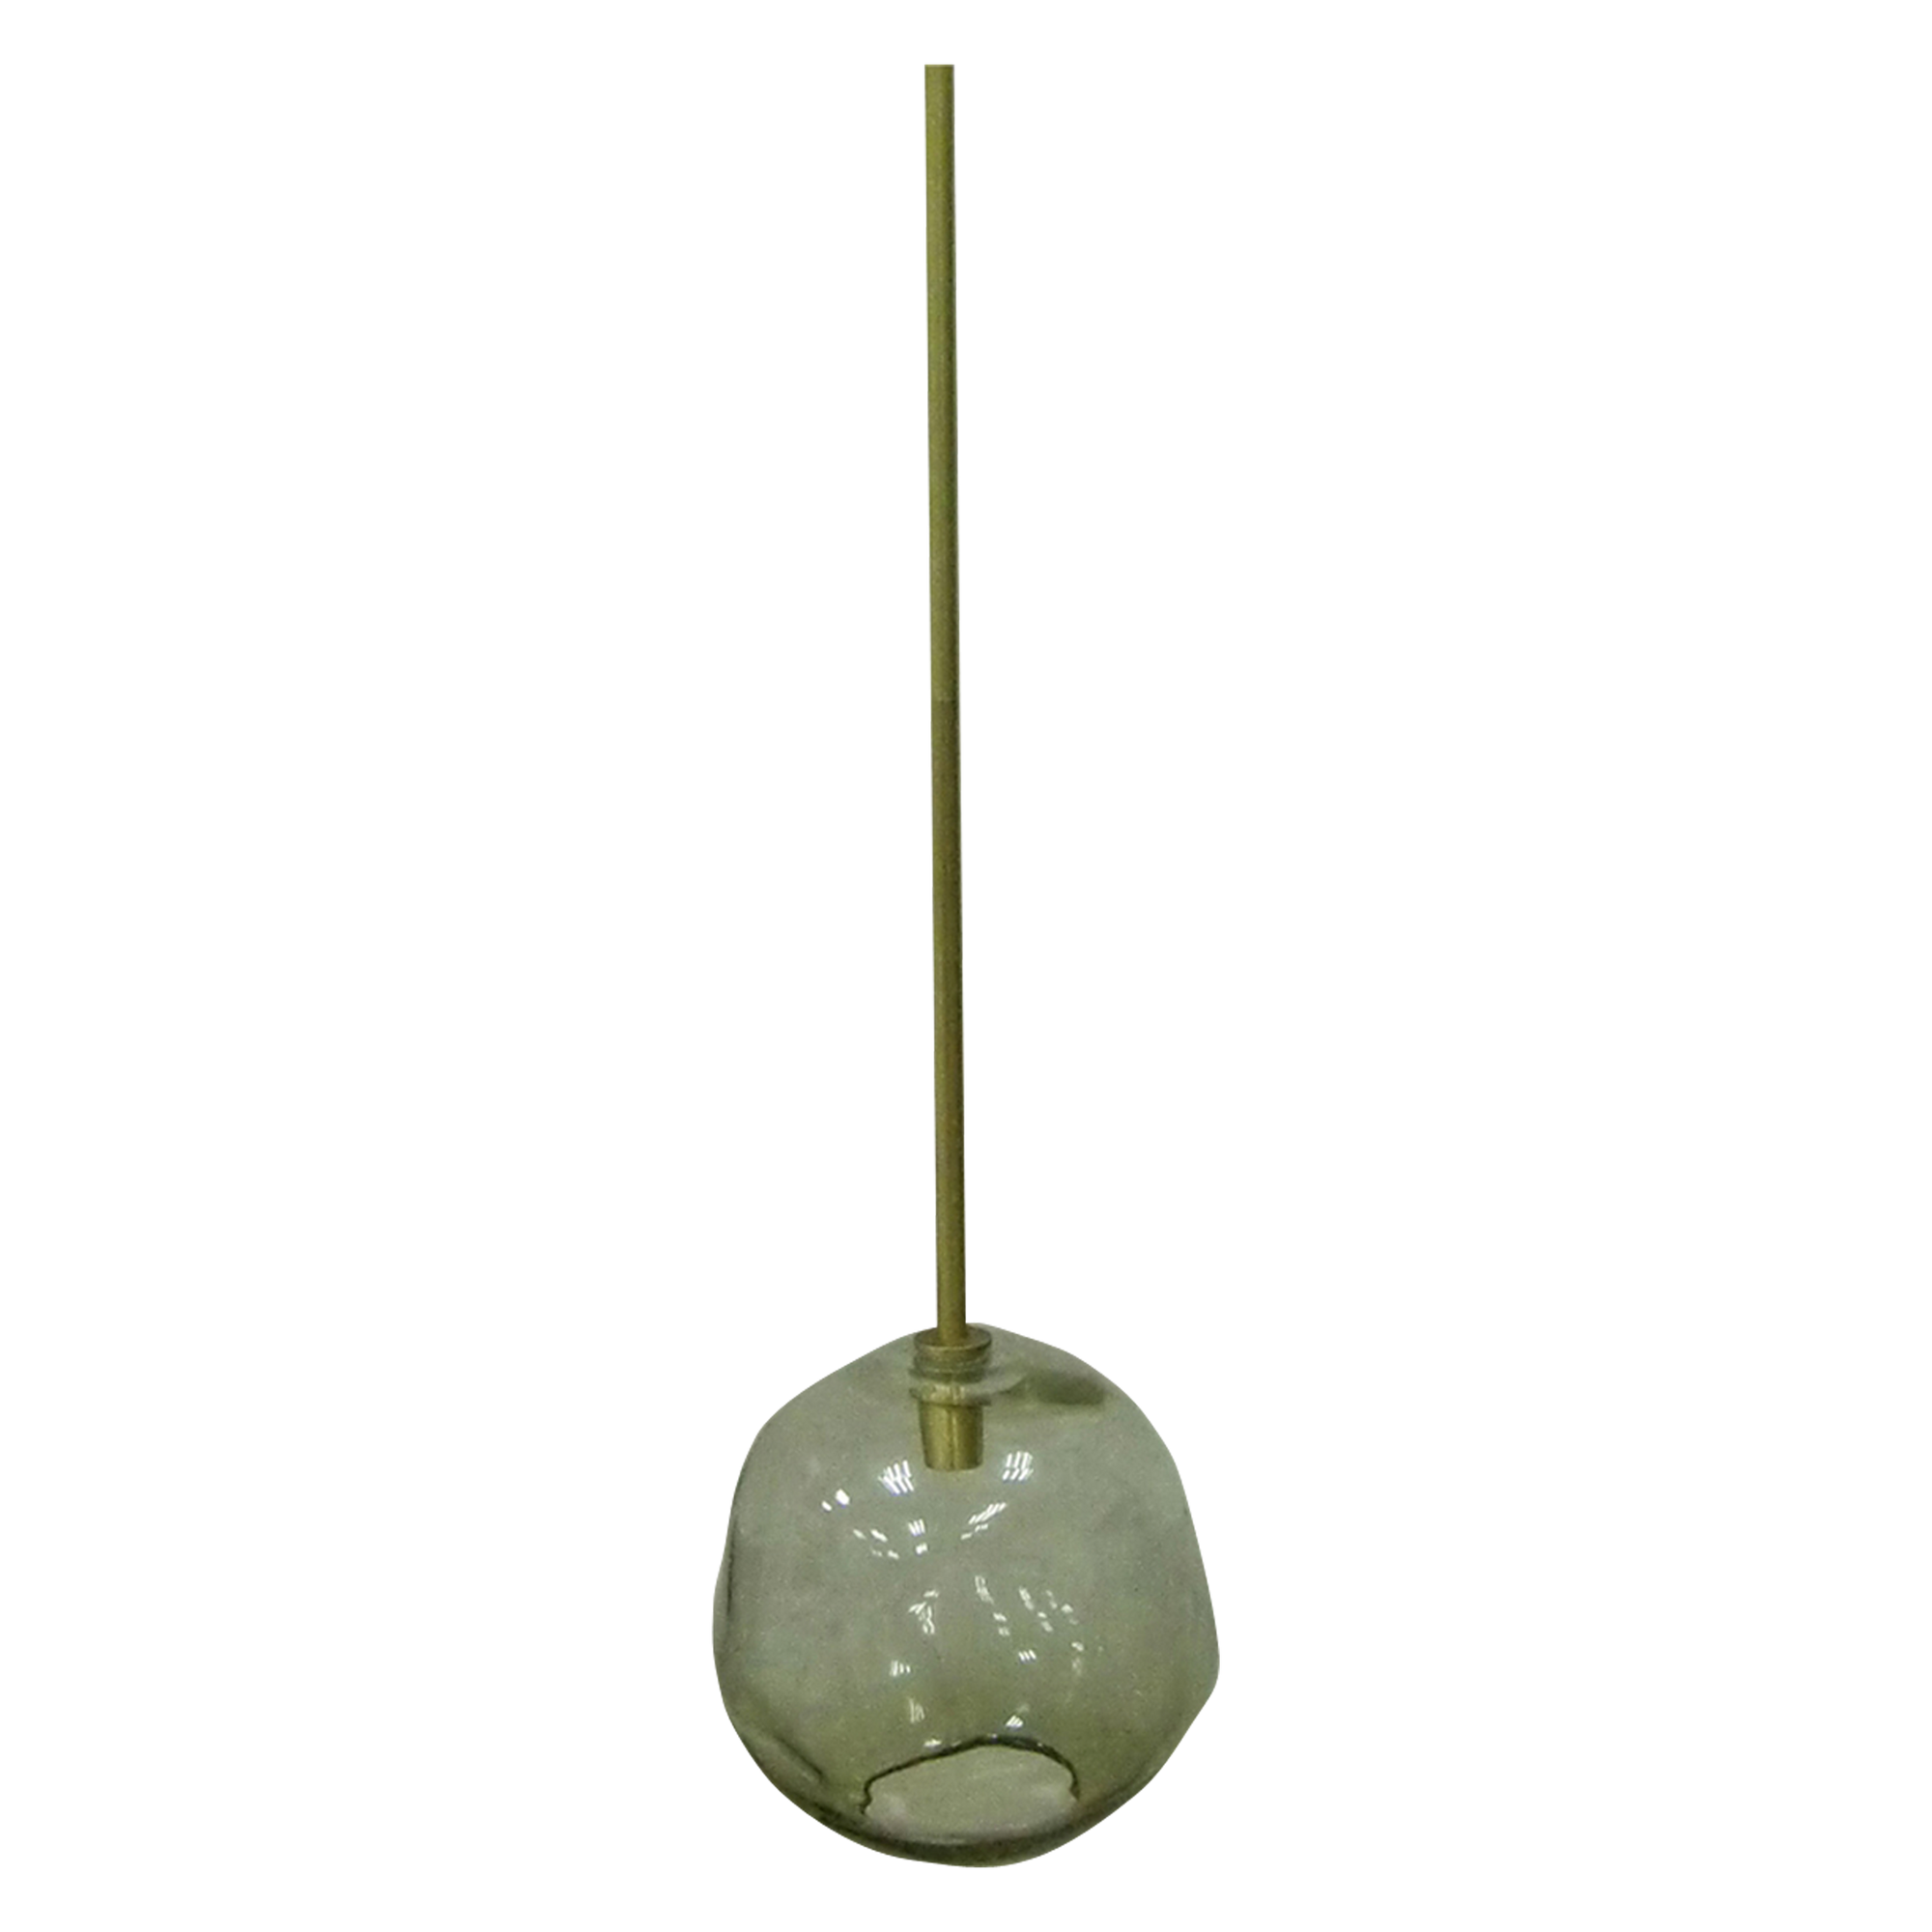 A smoked glass orb with an organic, irregular silhouette hangs from a brass rod in this elegant and natural pendant.